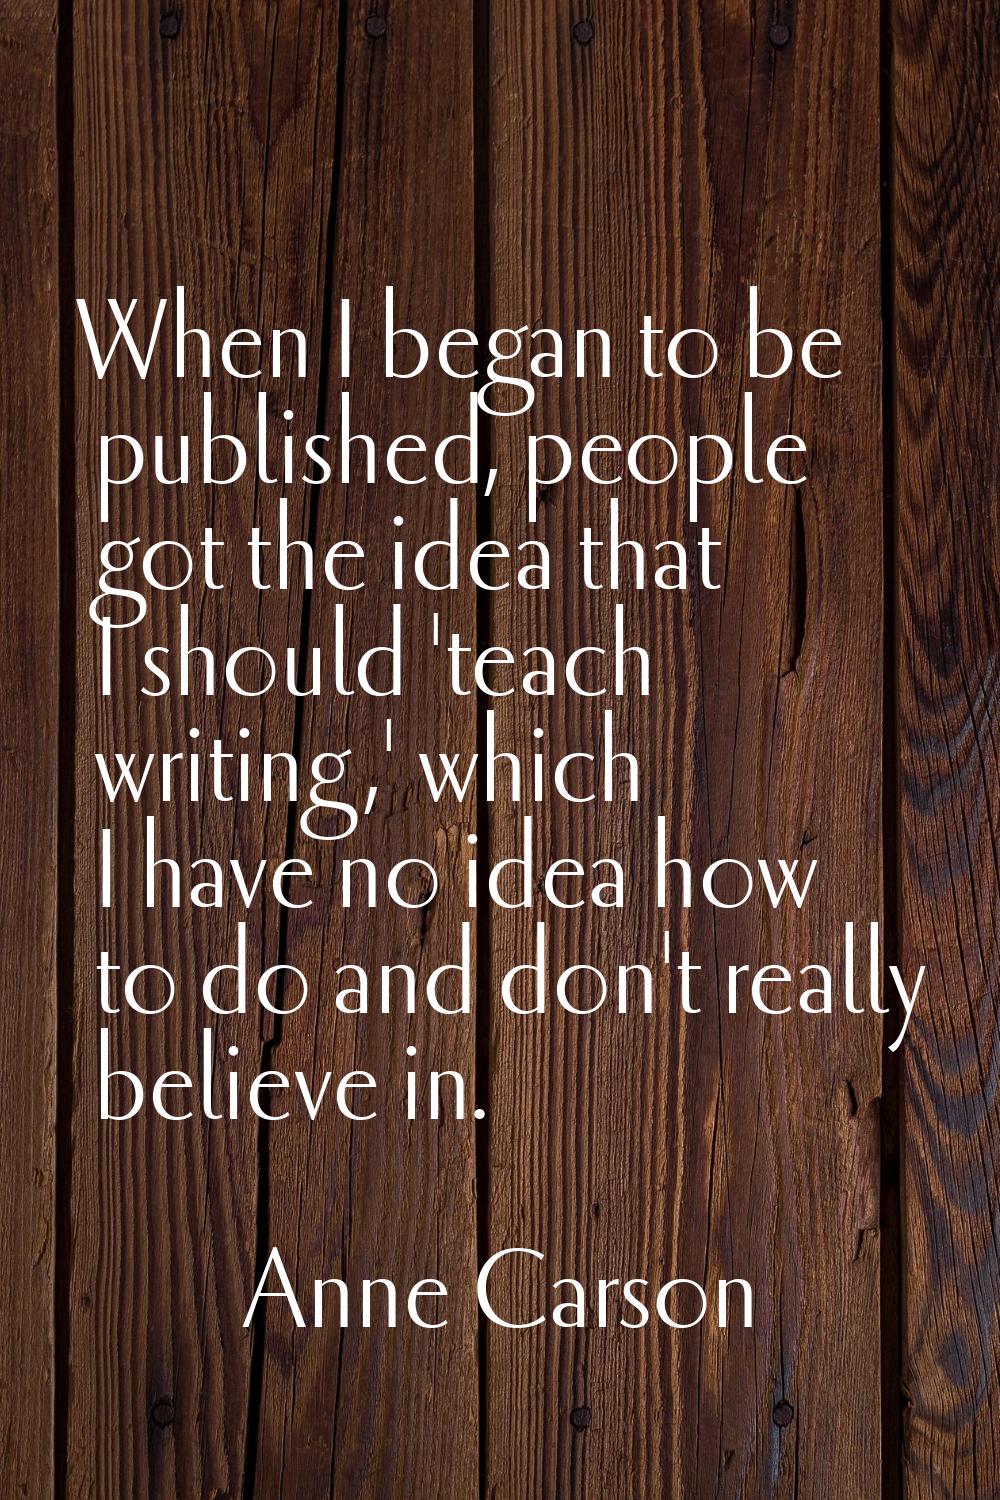 When I began to be published, people got the idea that I should 'teach writing,' which I have no id